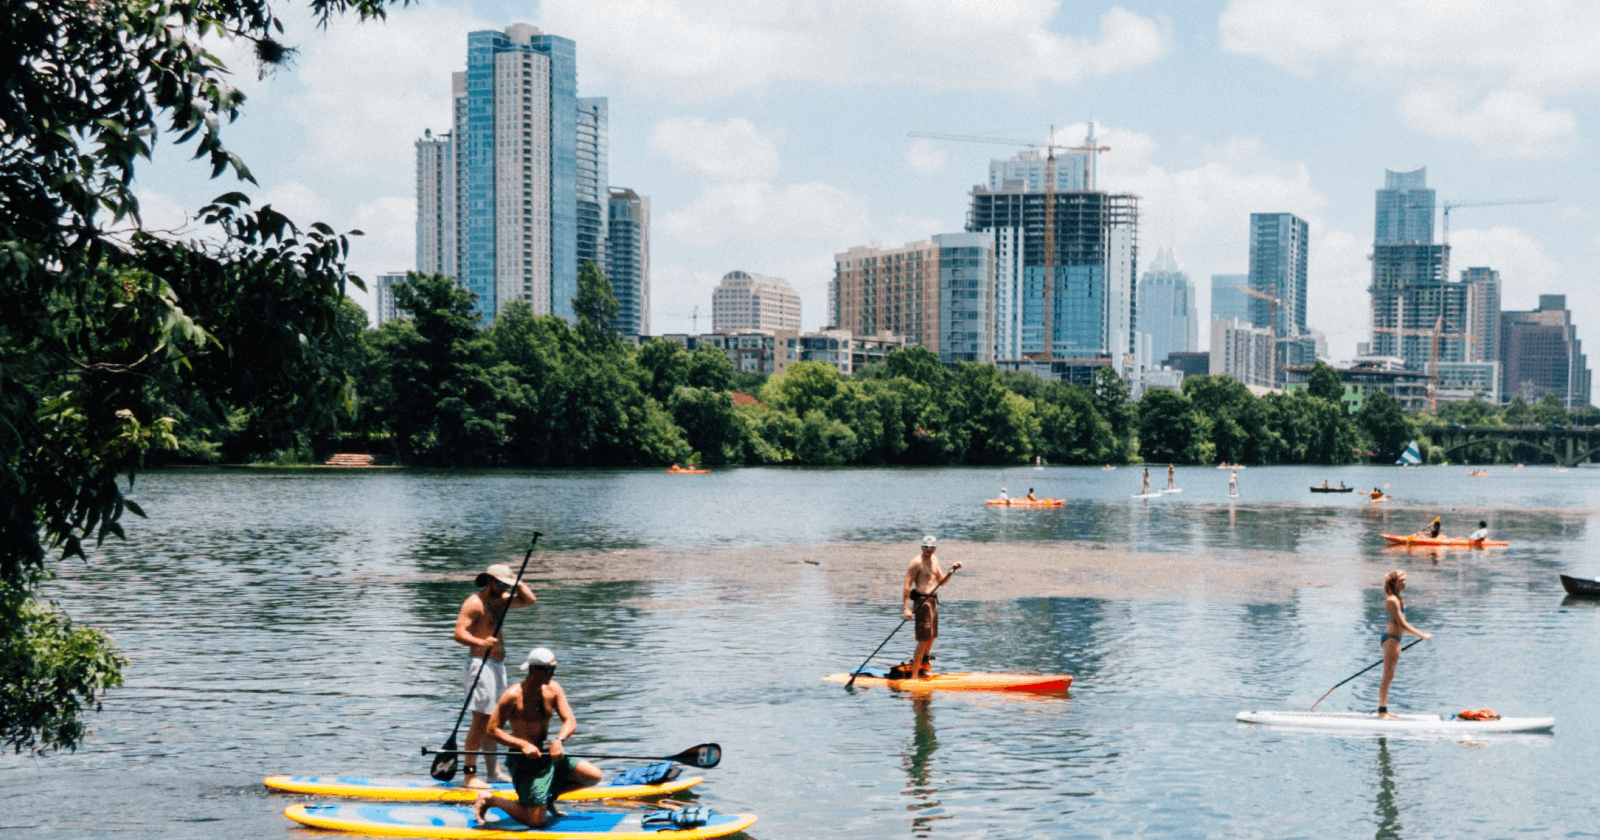 Photograph of People Paddle Boarding With Cityscape View of Austin, TX